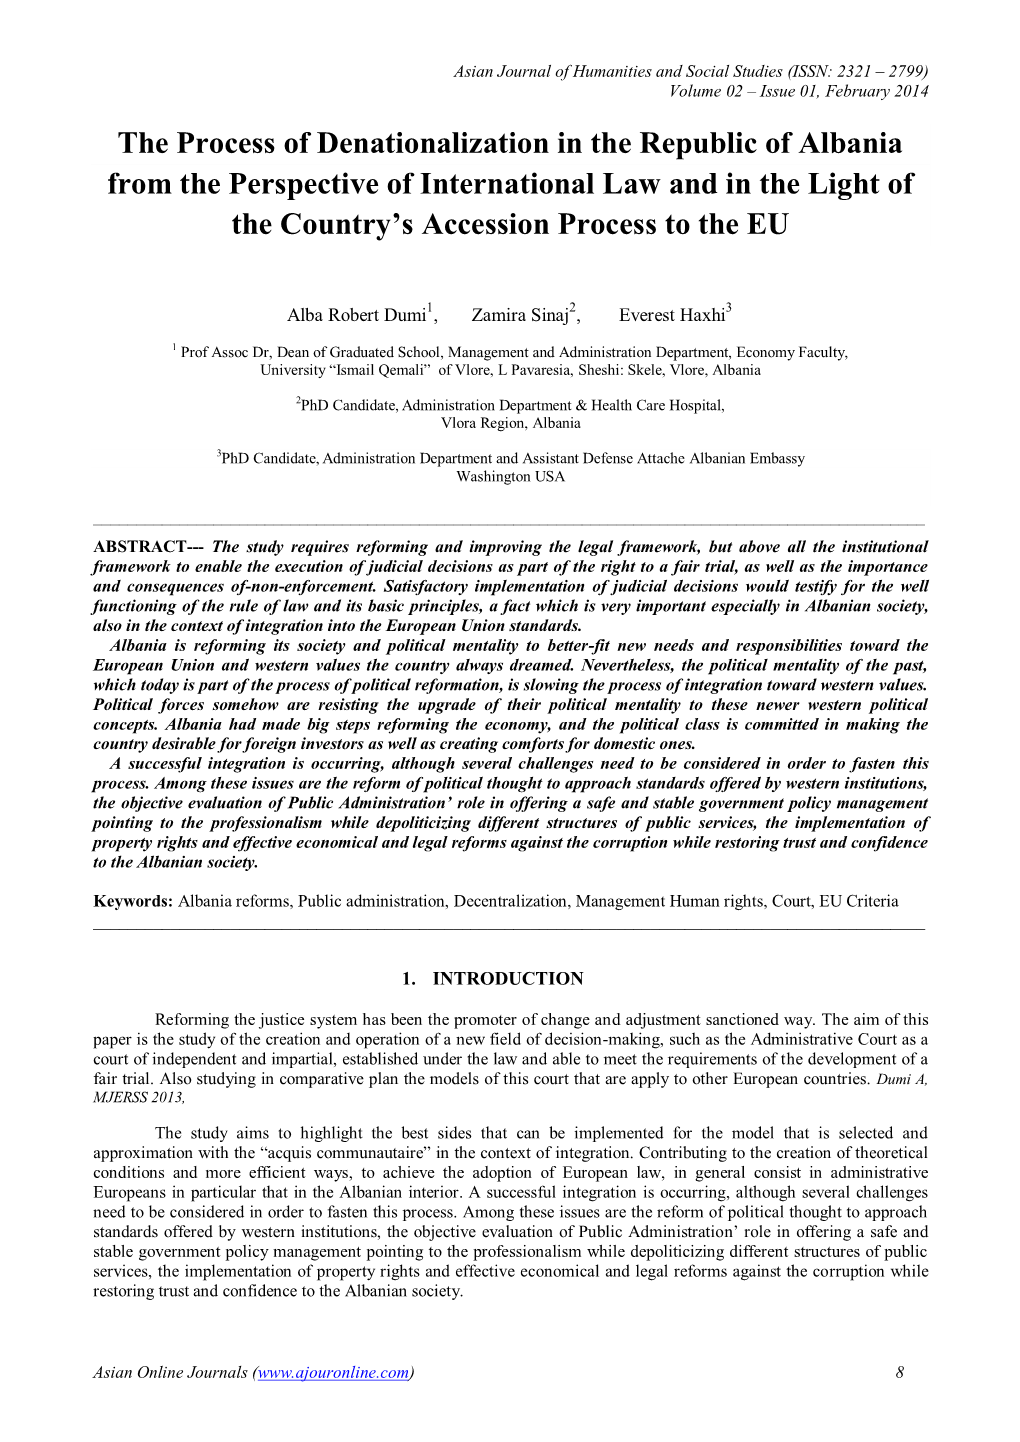 The Process of Denationalization in the Republic of Albania from the Perspective of International Law and in the Light of the Country’S Accession Process to the EU